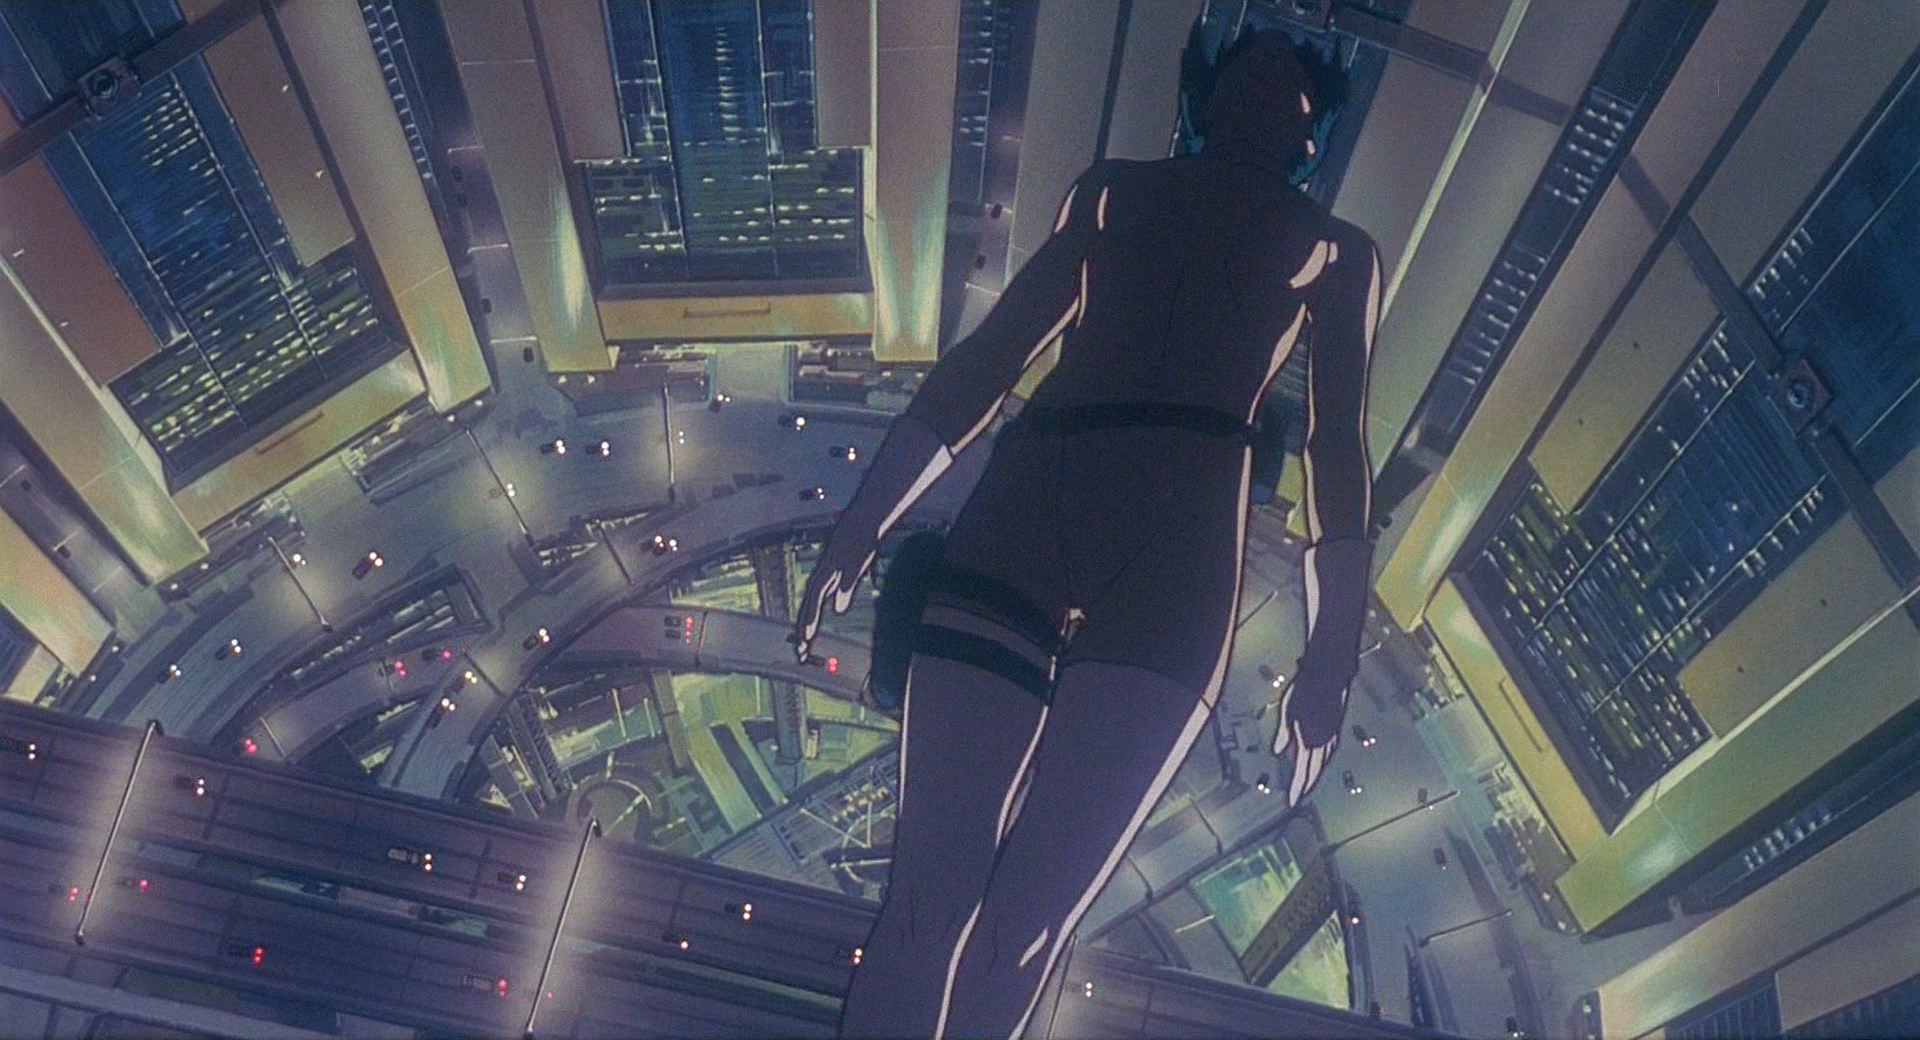 Ghost In The Shell 1995